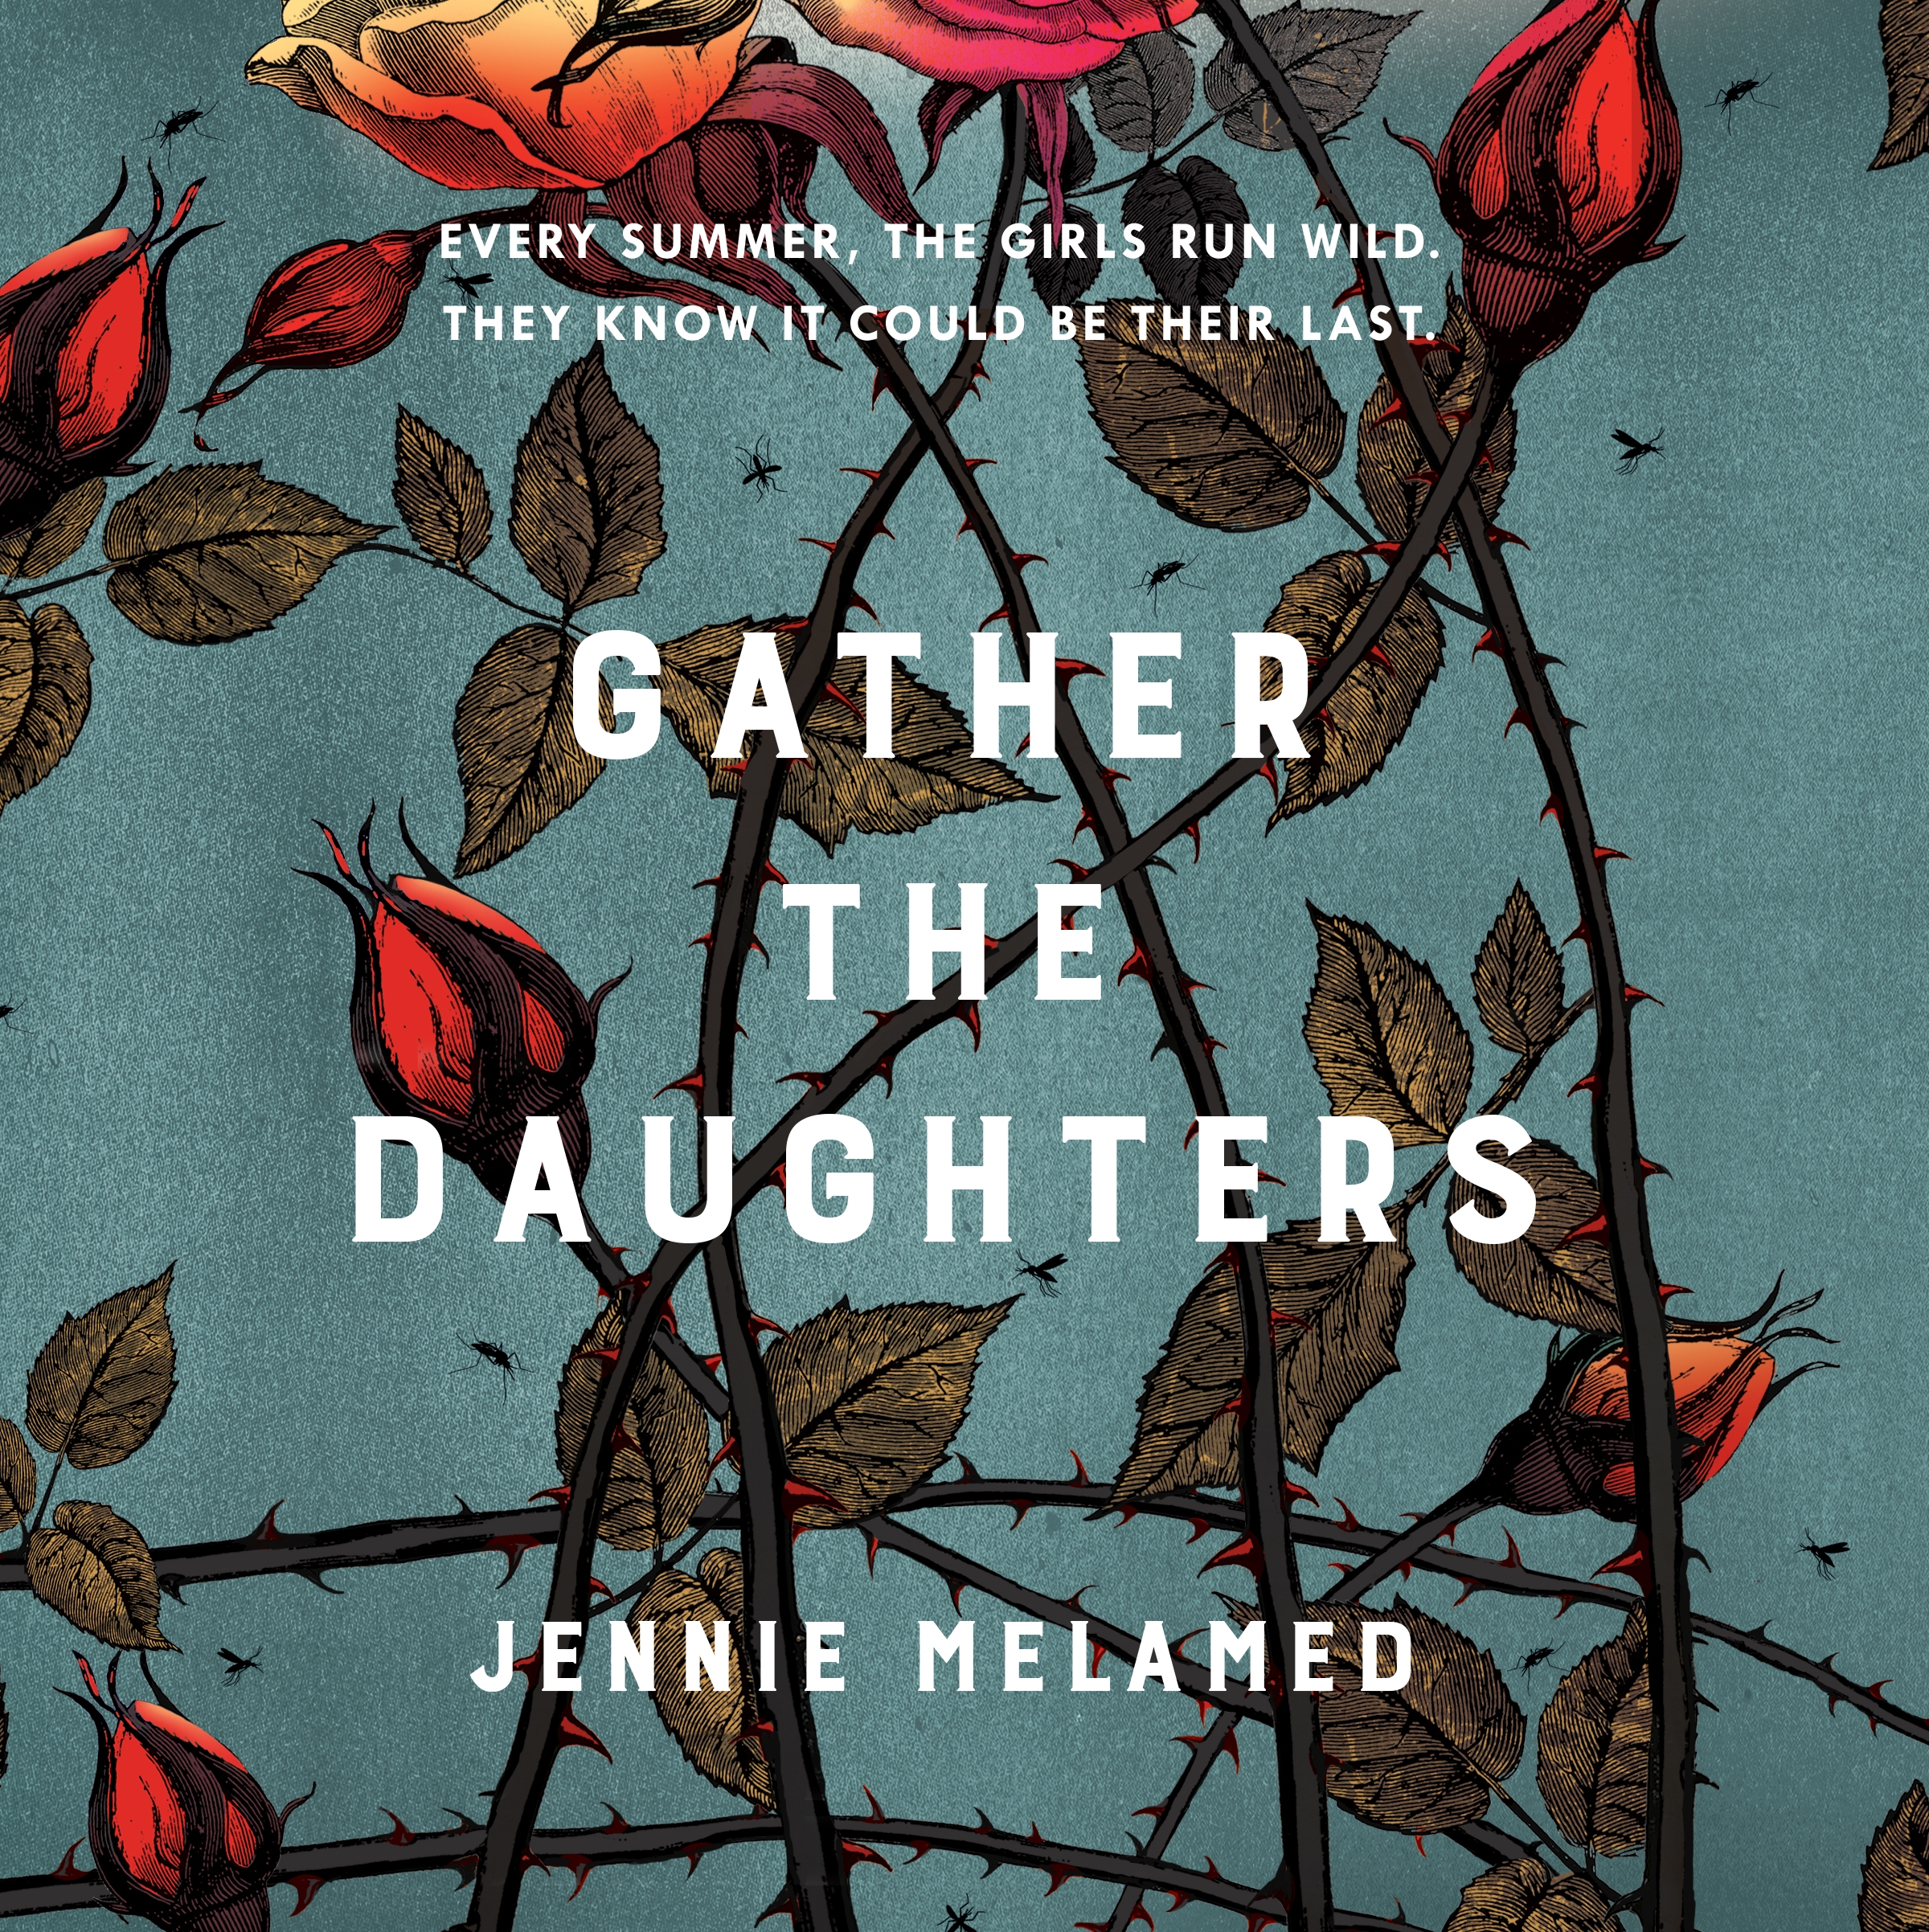 Gather the Daughters by Jennie Melamed